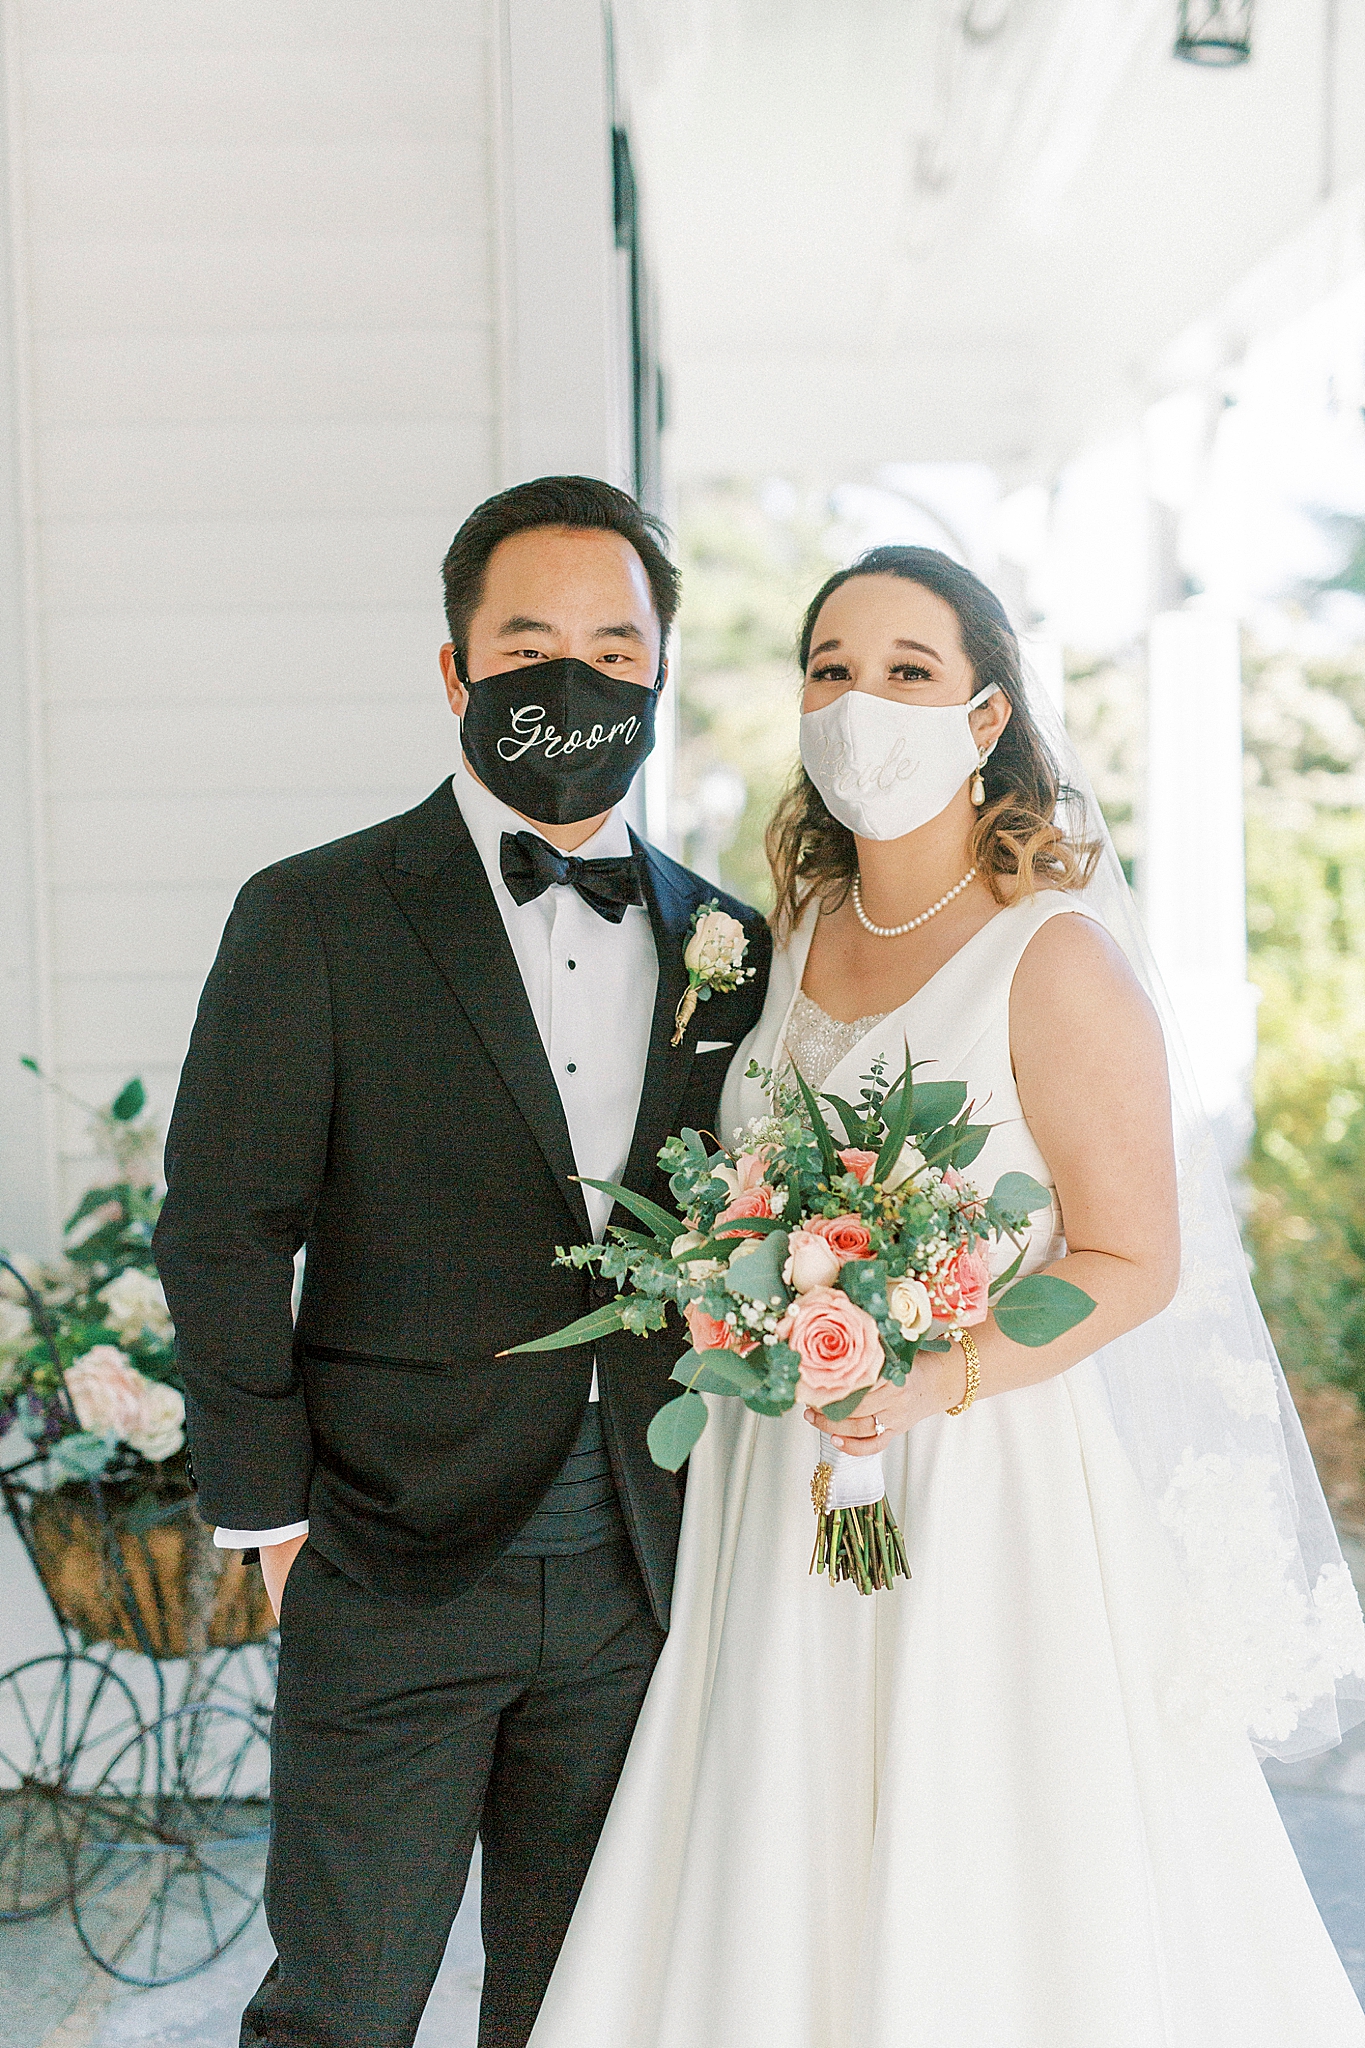 newlyweds pose in Bride and Groom masks